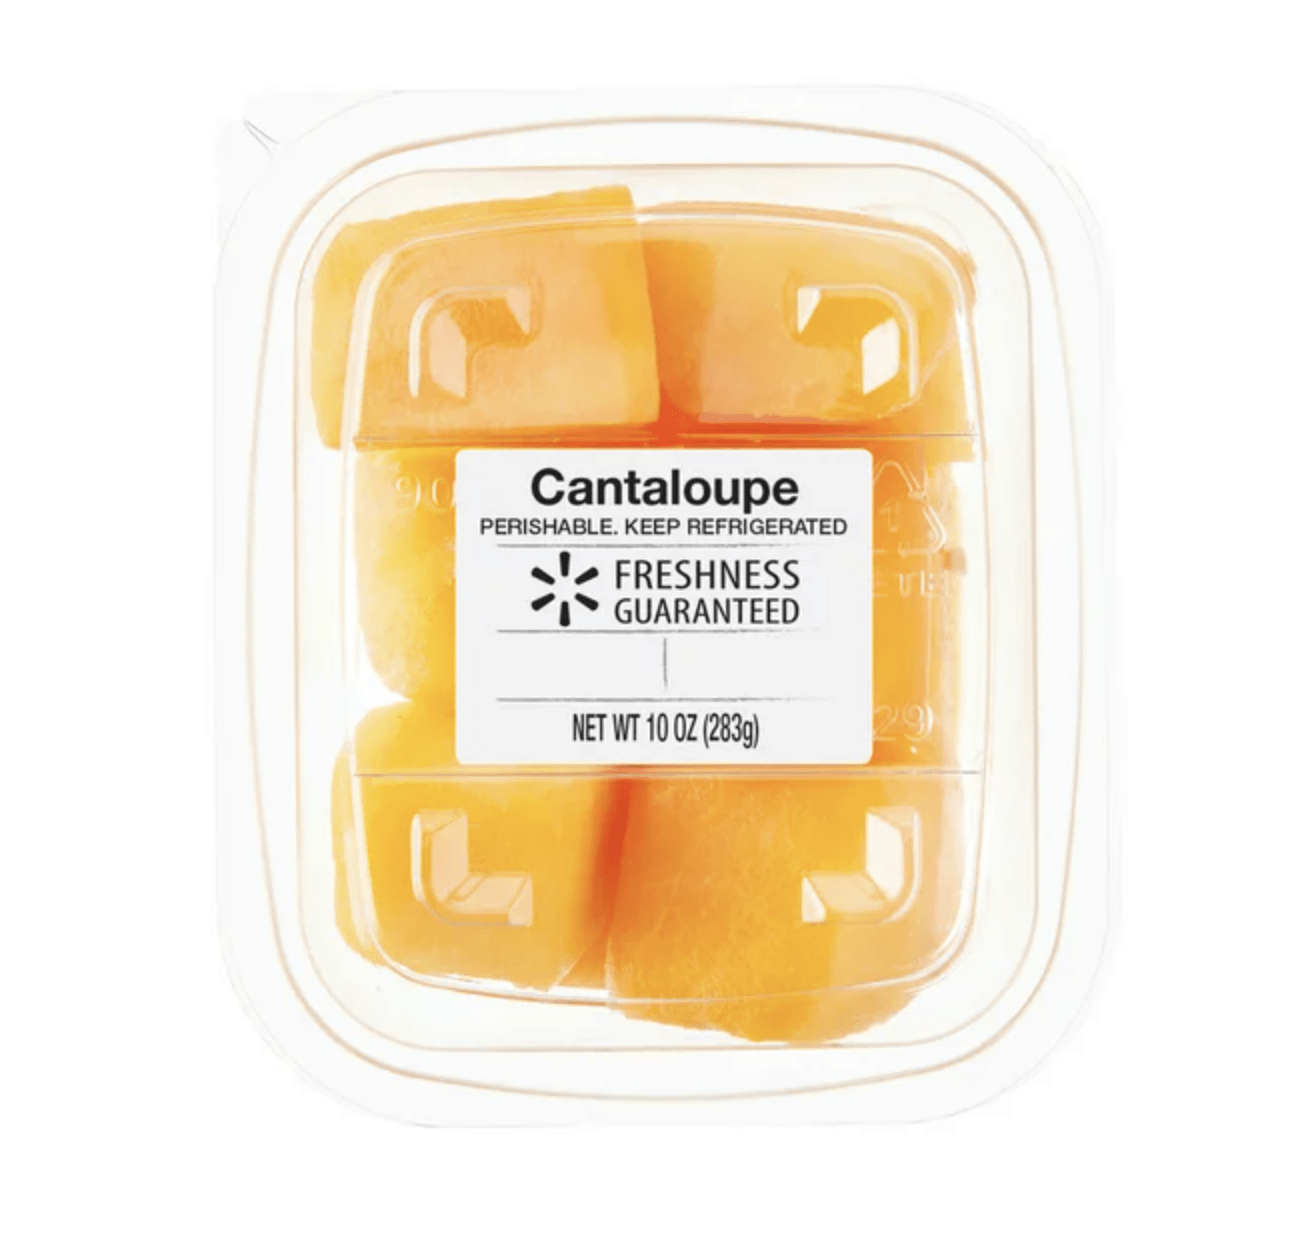 pre-cut cantaloupe in package